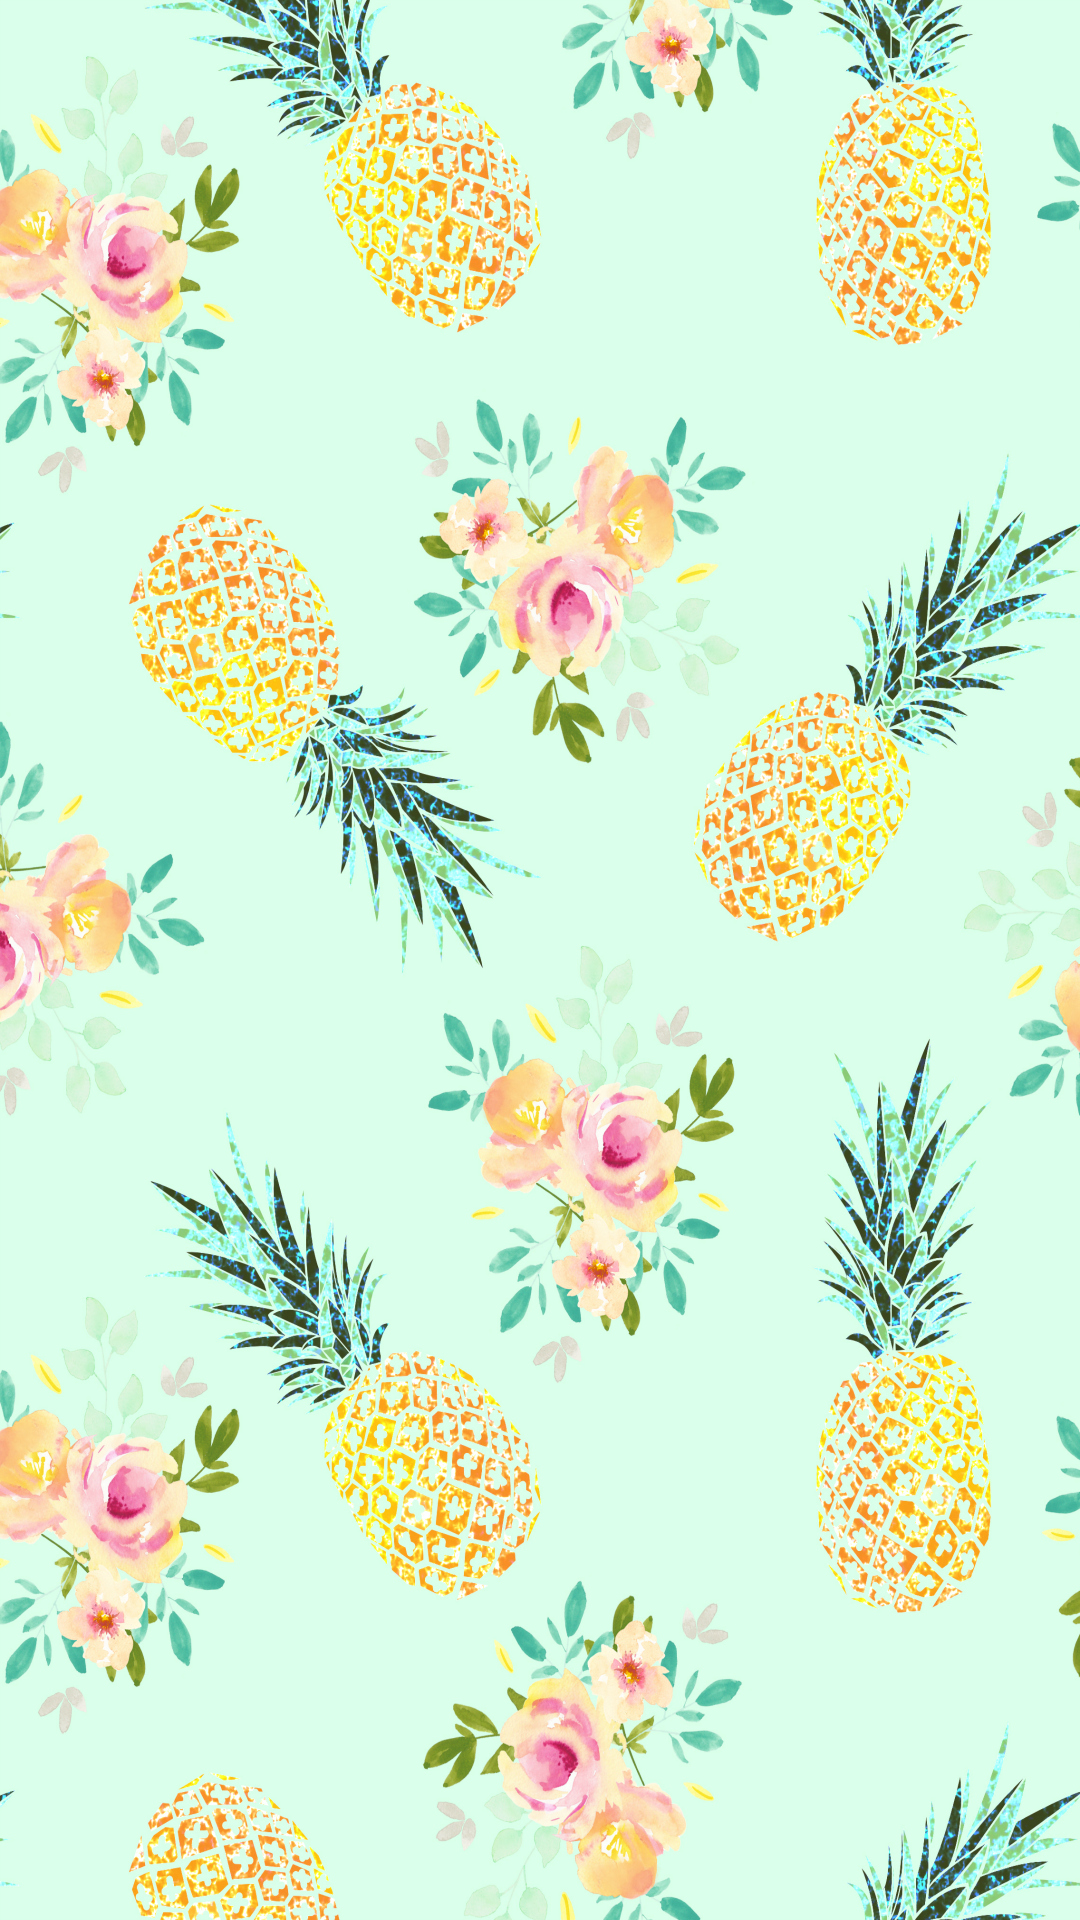 Free Phone Wallpapers And Backgrounds - Cute Pineapple Backgrounds , HD Wallpaper & Backgrounds